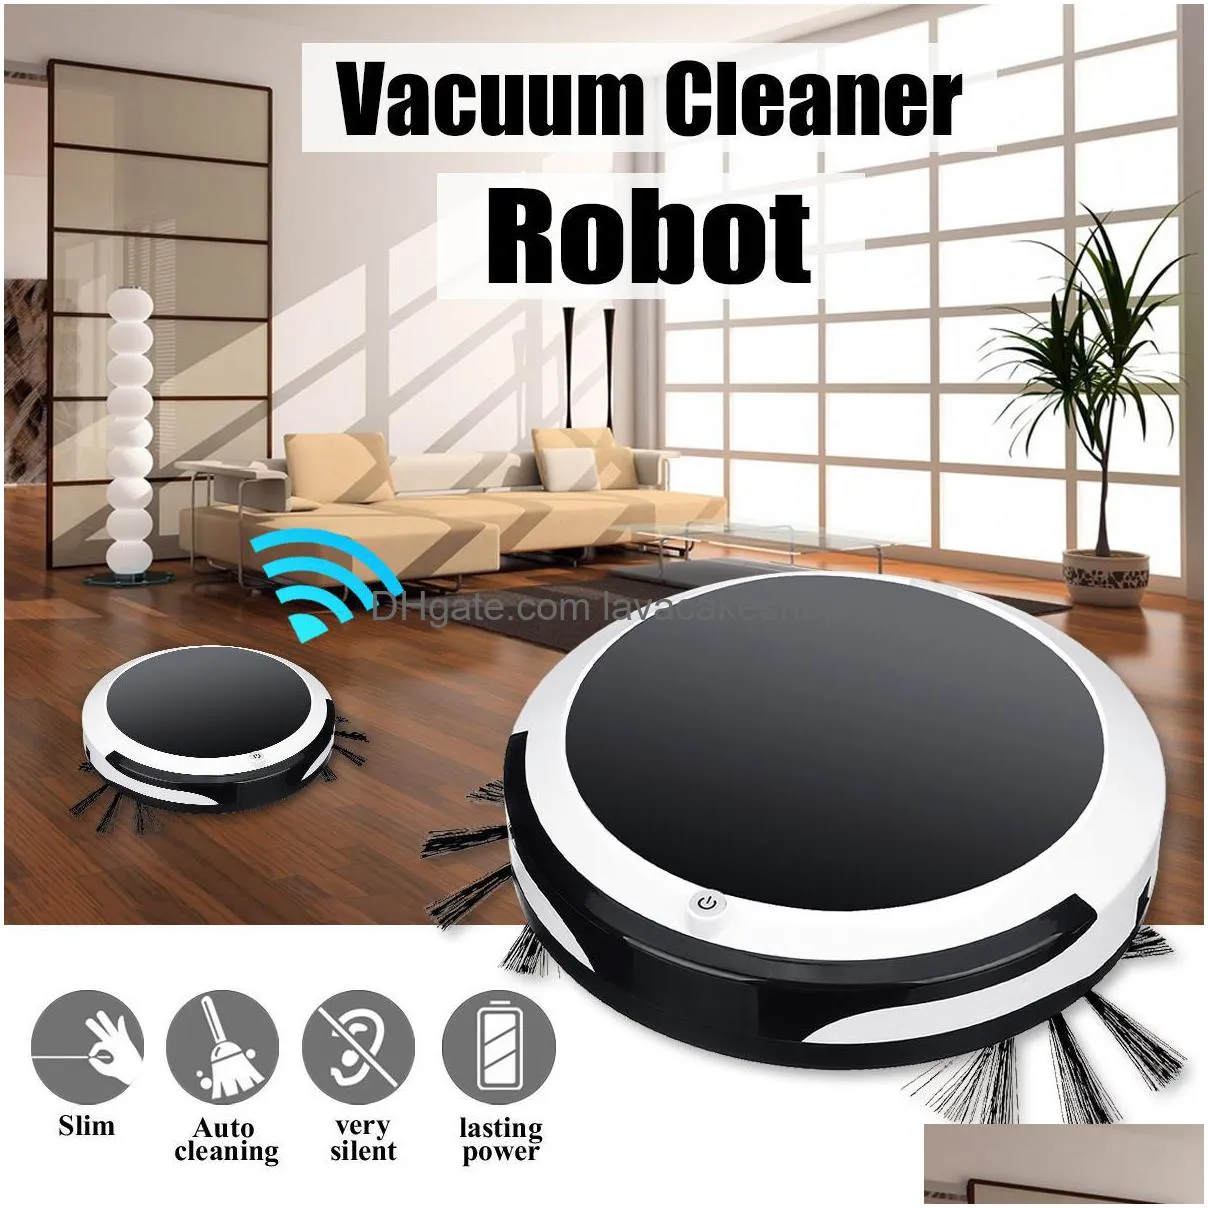 Vacuums 3In1 Smart Robot Vacuum Cleaner For Home Office Swee Sweep Suction Drag Hine 1200Pa Wet Dry Drop Delivery Garden Housekee Or Dh9Fg